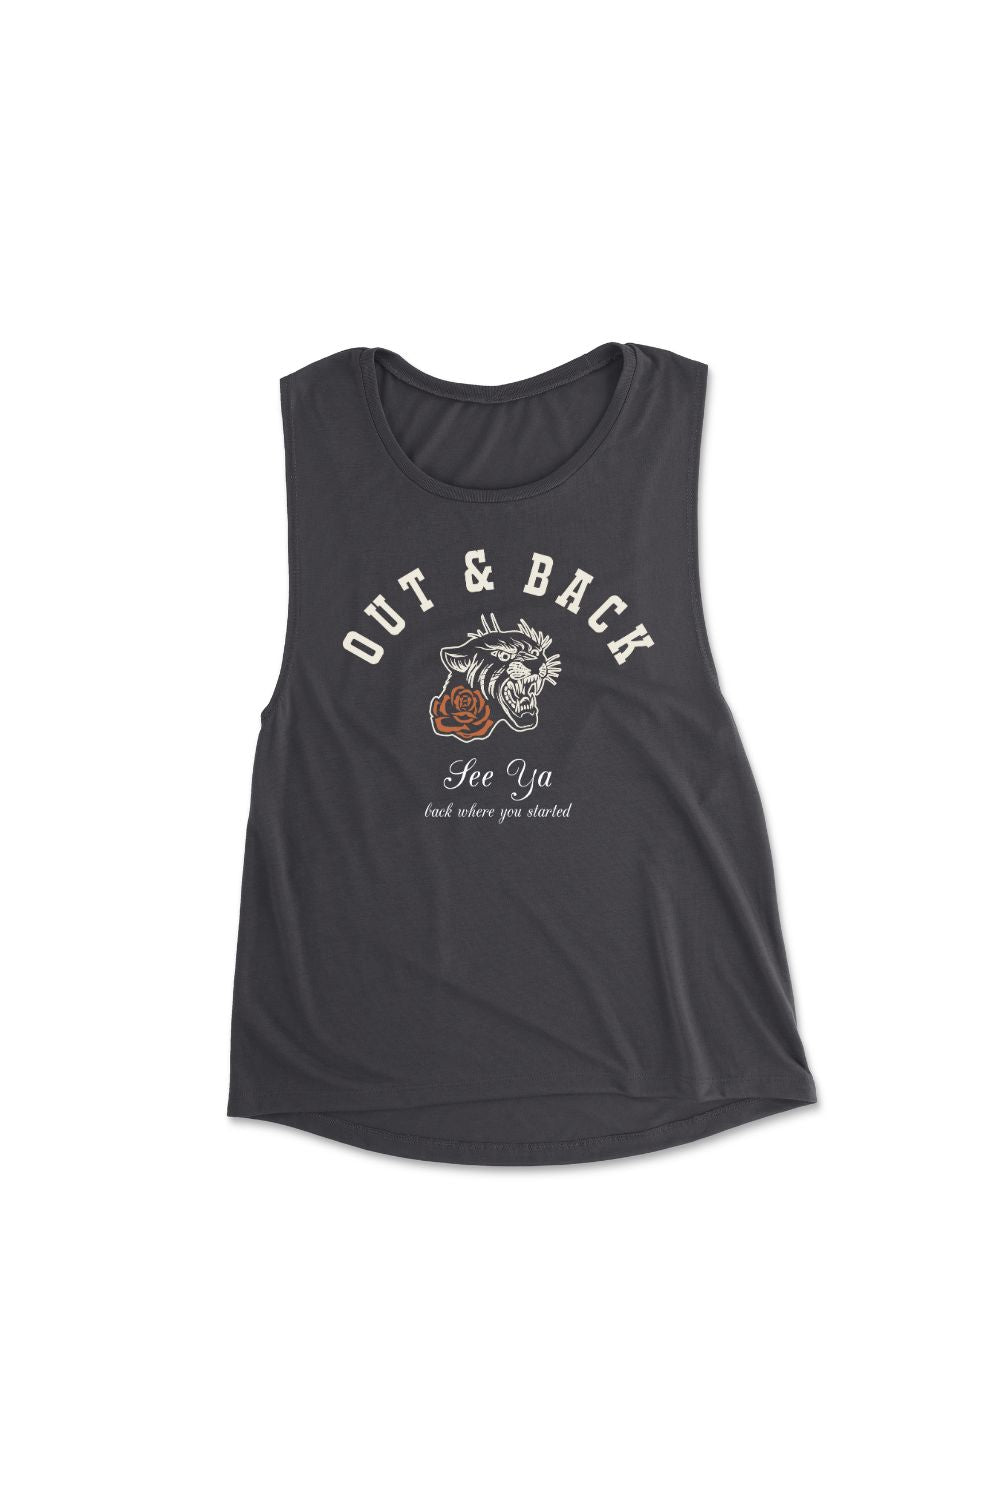 Out & Back Tank